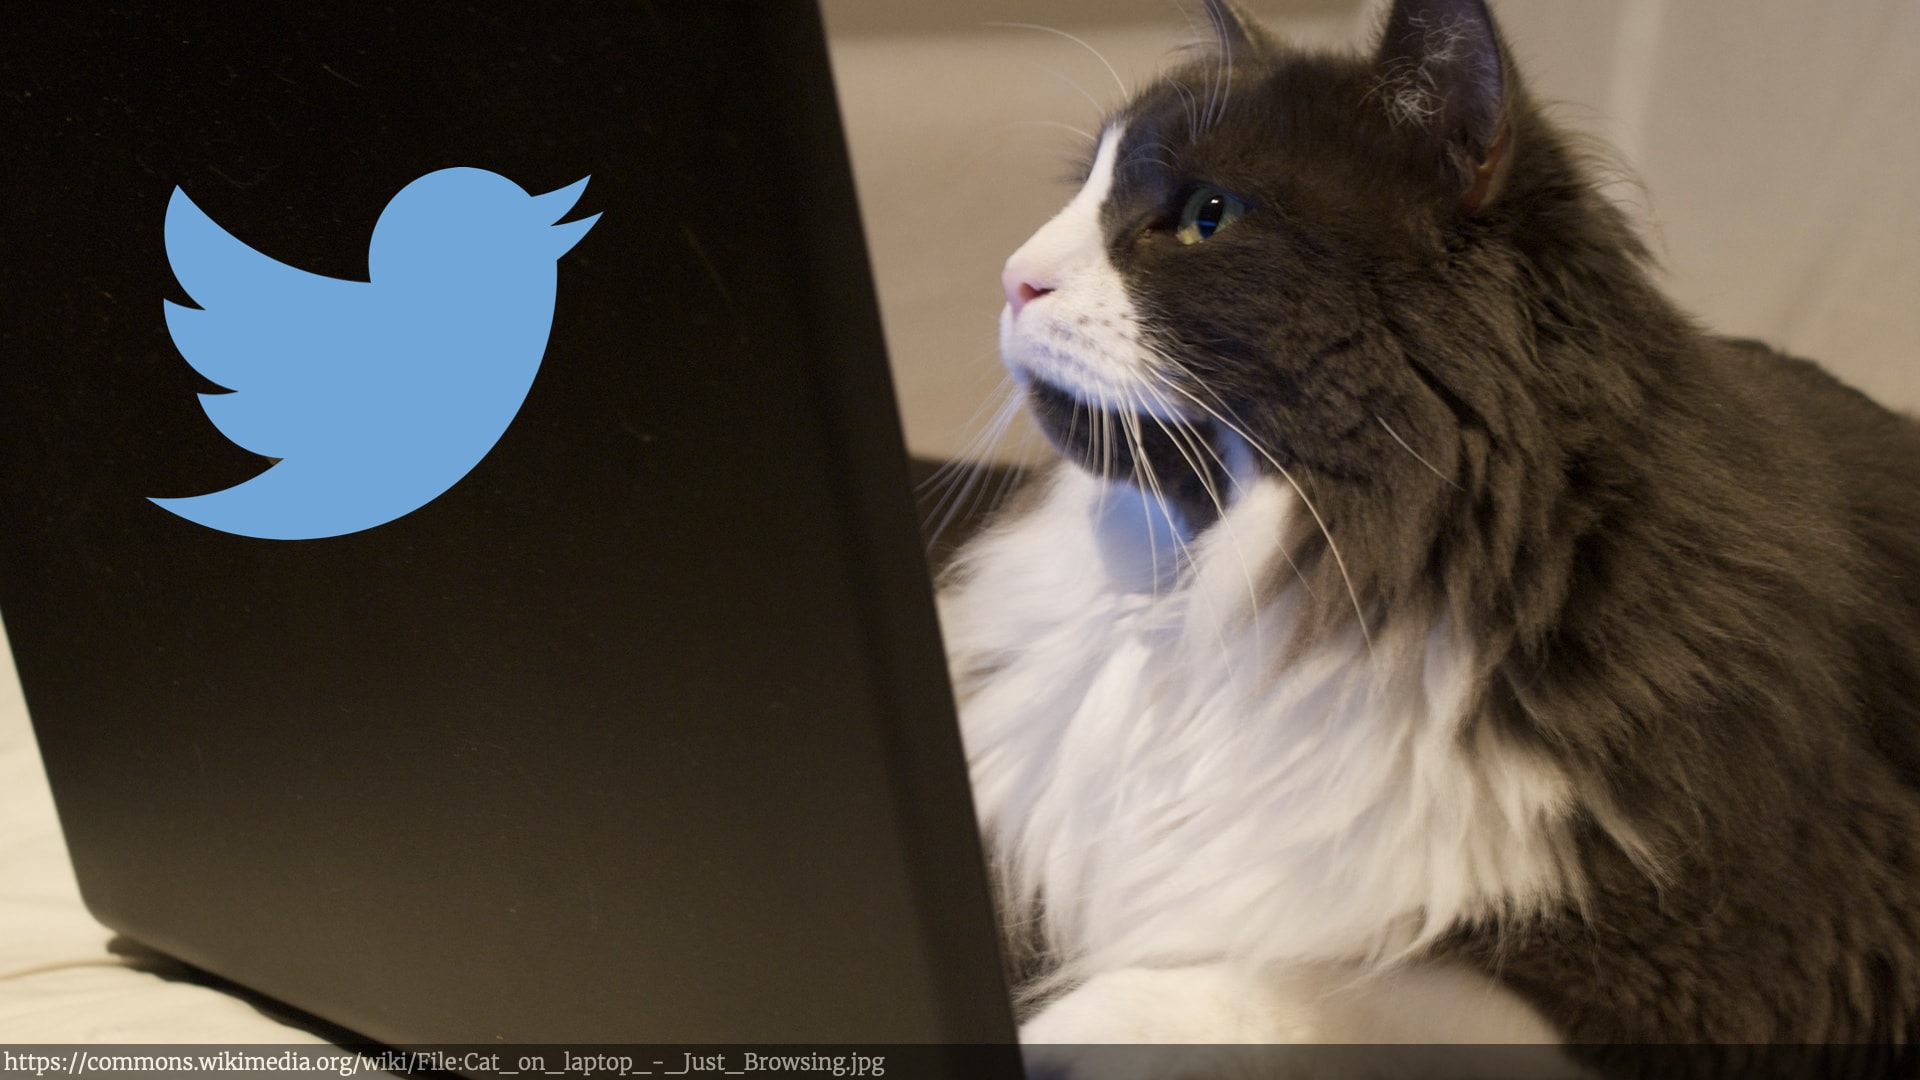 Photo of a cat in front of a laptop with the twitter logo on the back.